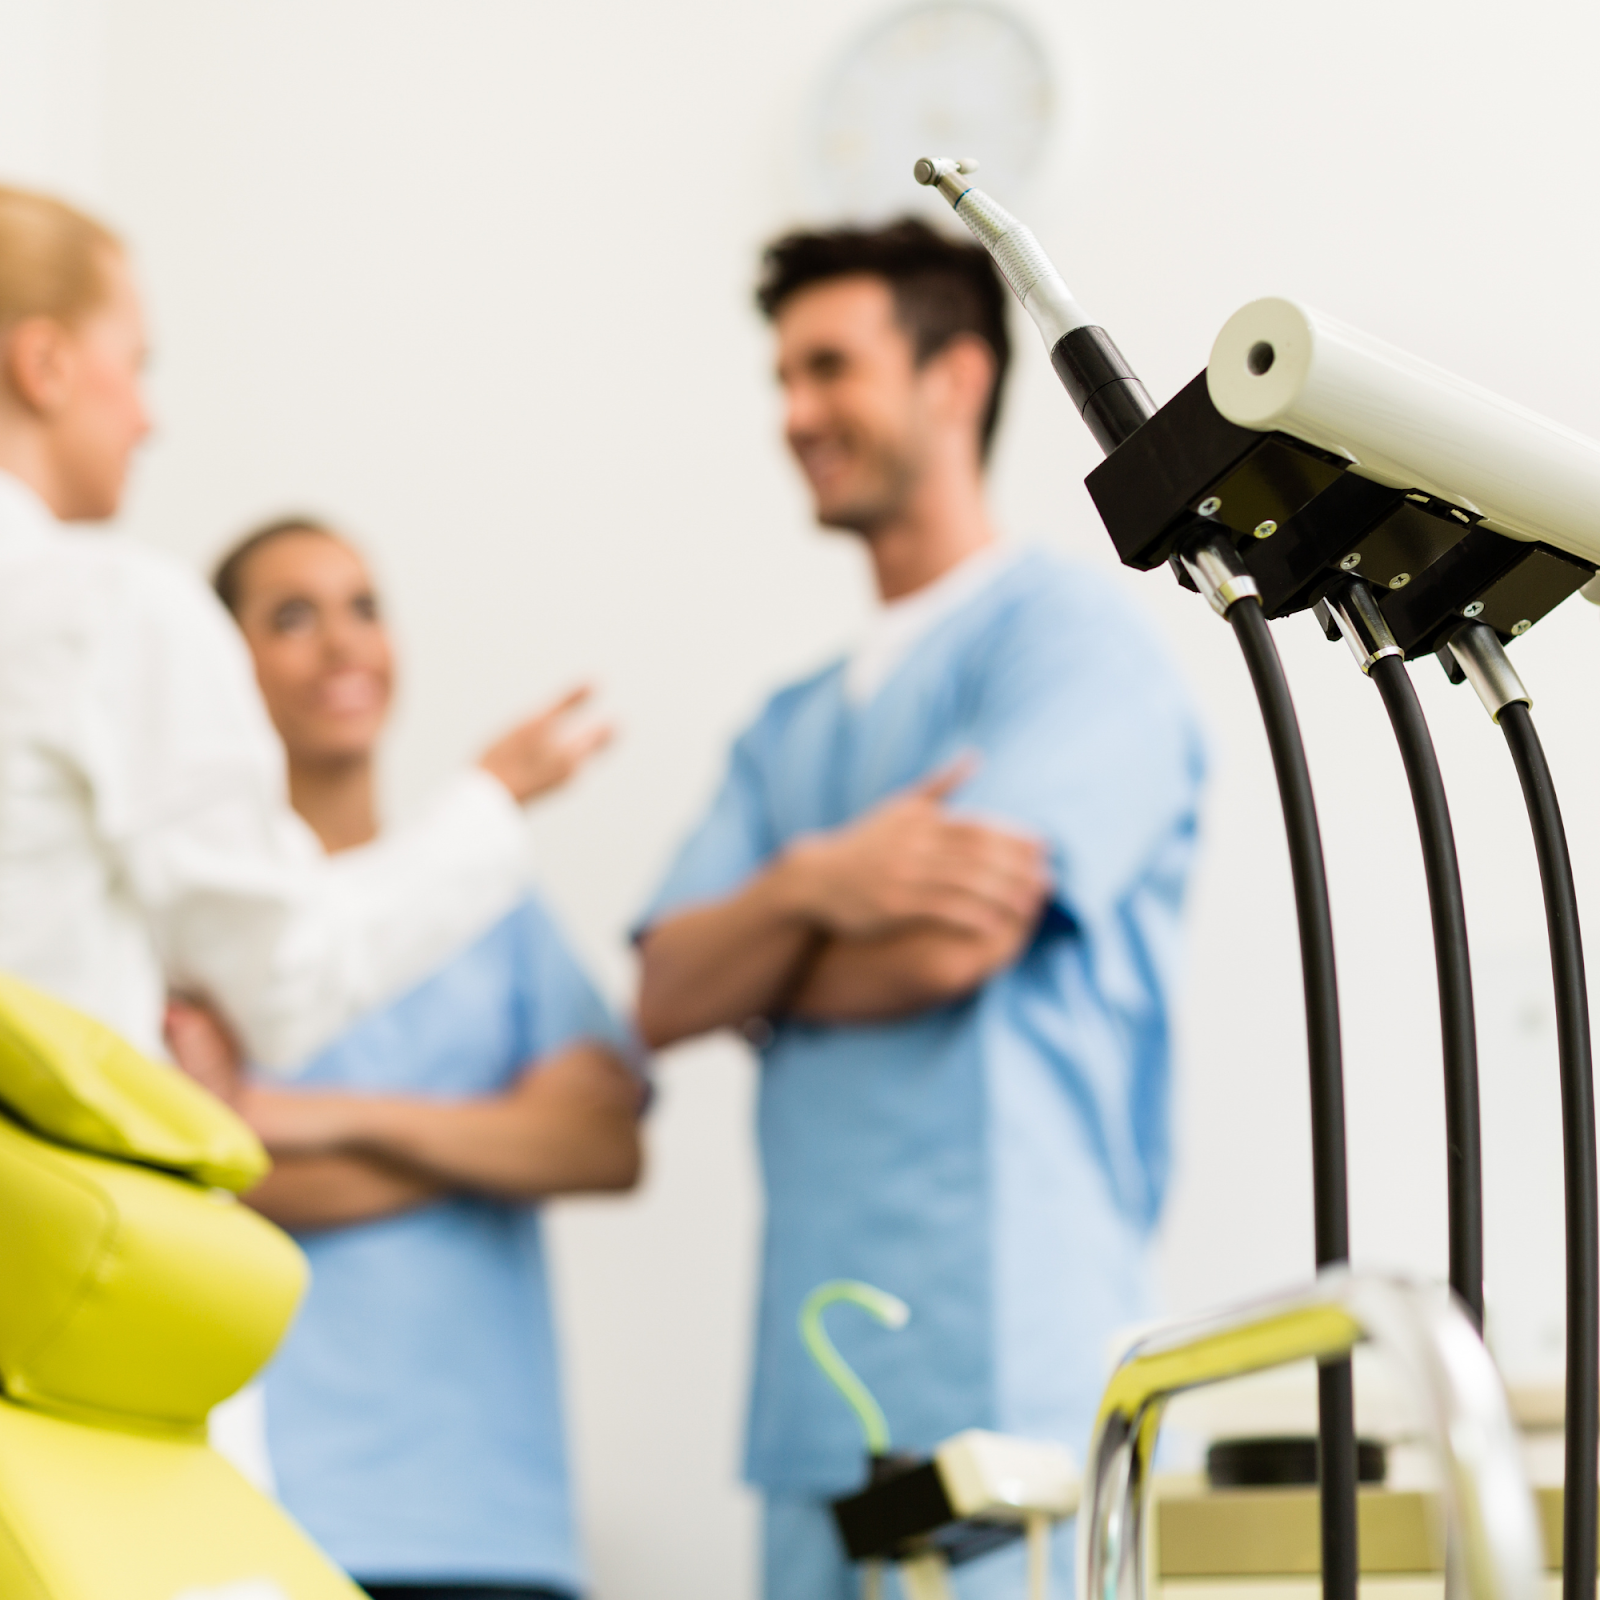 The Power of Collaboration: The Orthodontist's Role in Multidisciplinary Cooperation